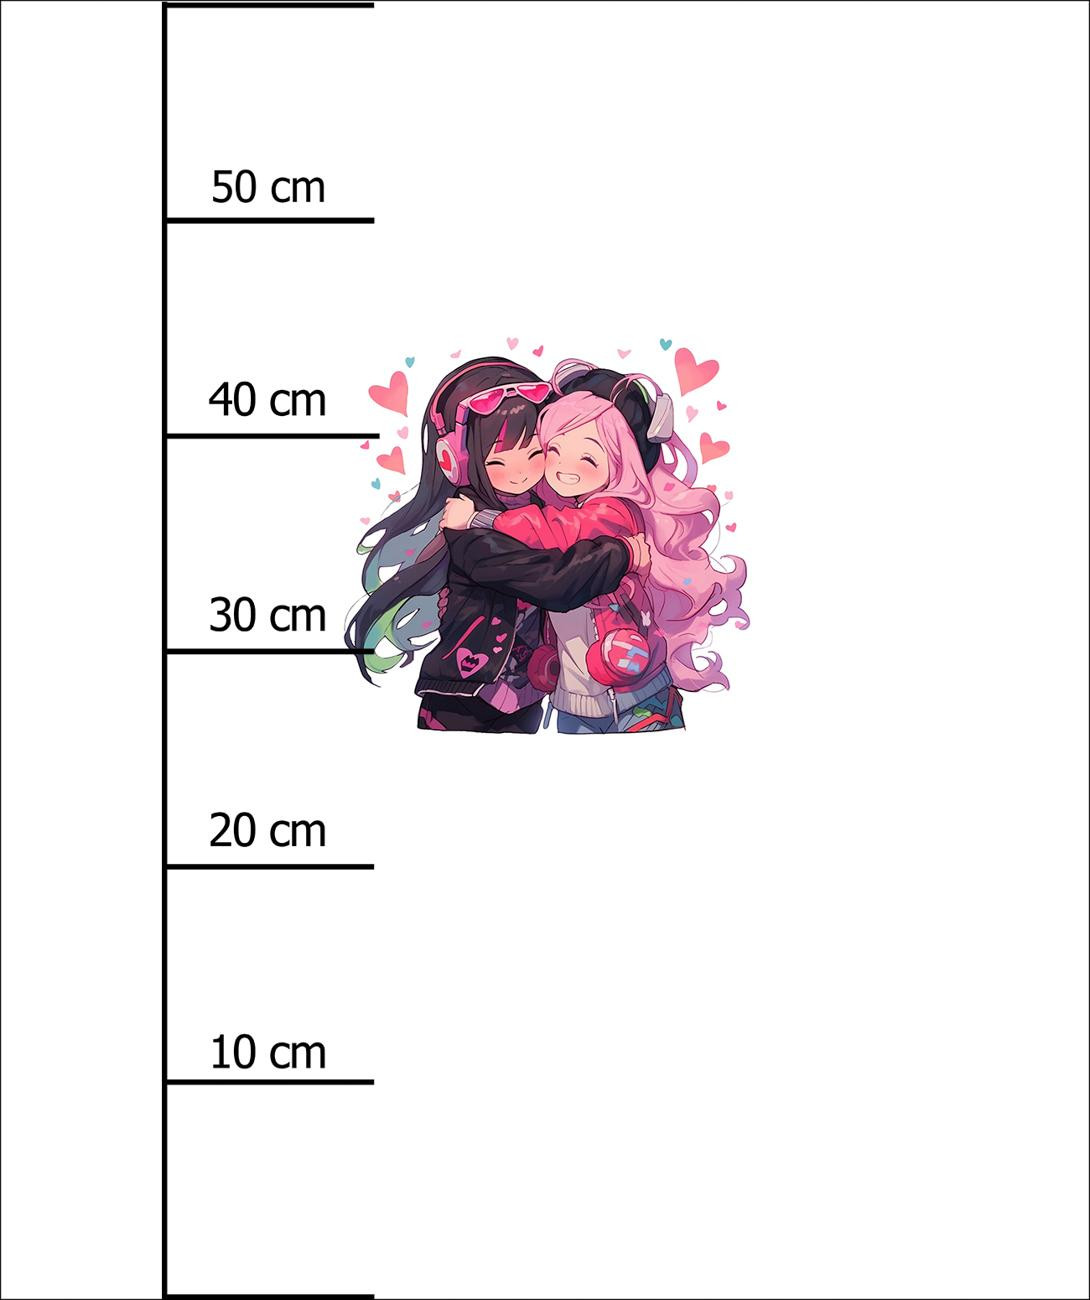 ANIME FRIENDS PAT. 1 -  PANEL (60cm x 50cm) brushed knitwear with elastane ITY